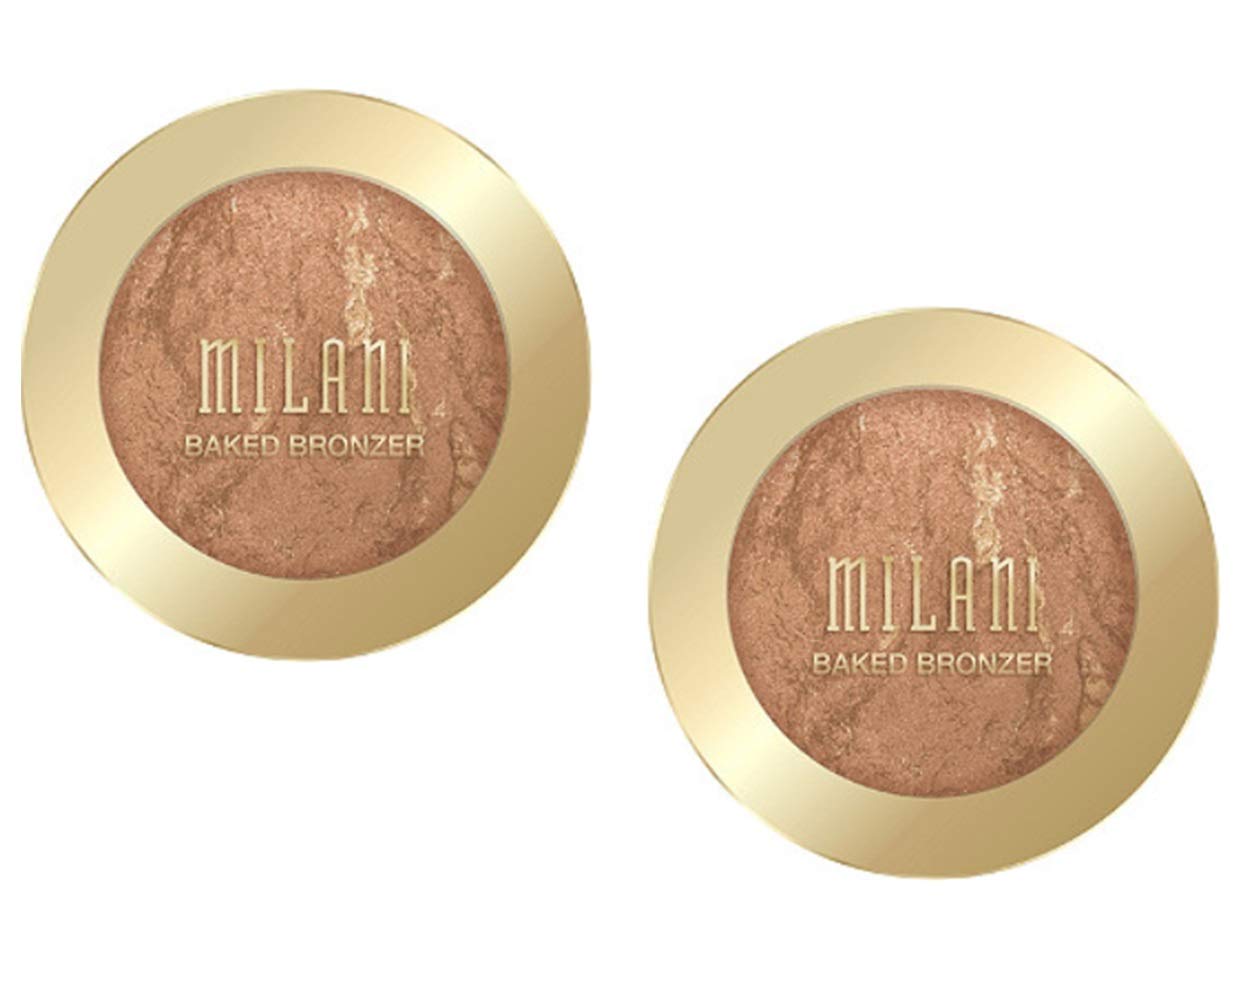 Pack of 2 Milani Baked Bronzer, Dolce (09)